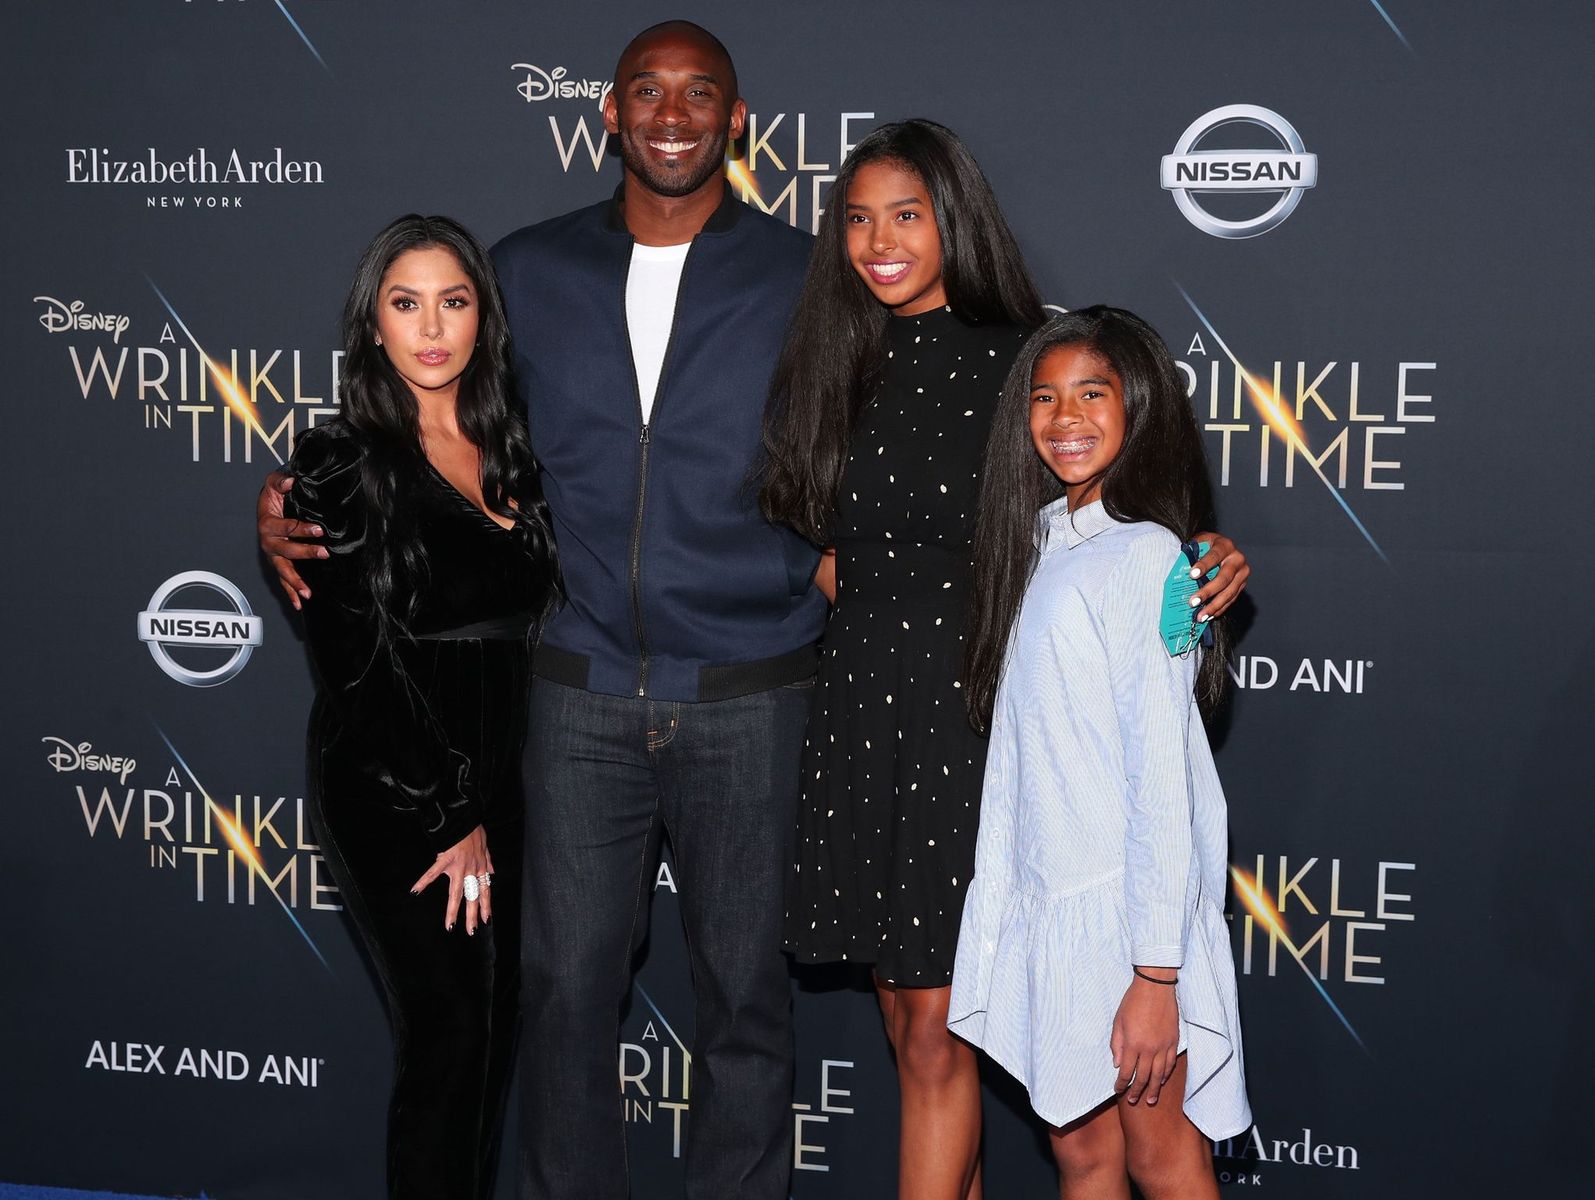 Vanessa and Kobe Bryant and their children at the premiere of "A Wrinkle In Time" in Los Angeles on February 26, 2018. | Photo: Getty Images